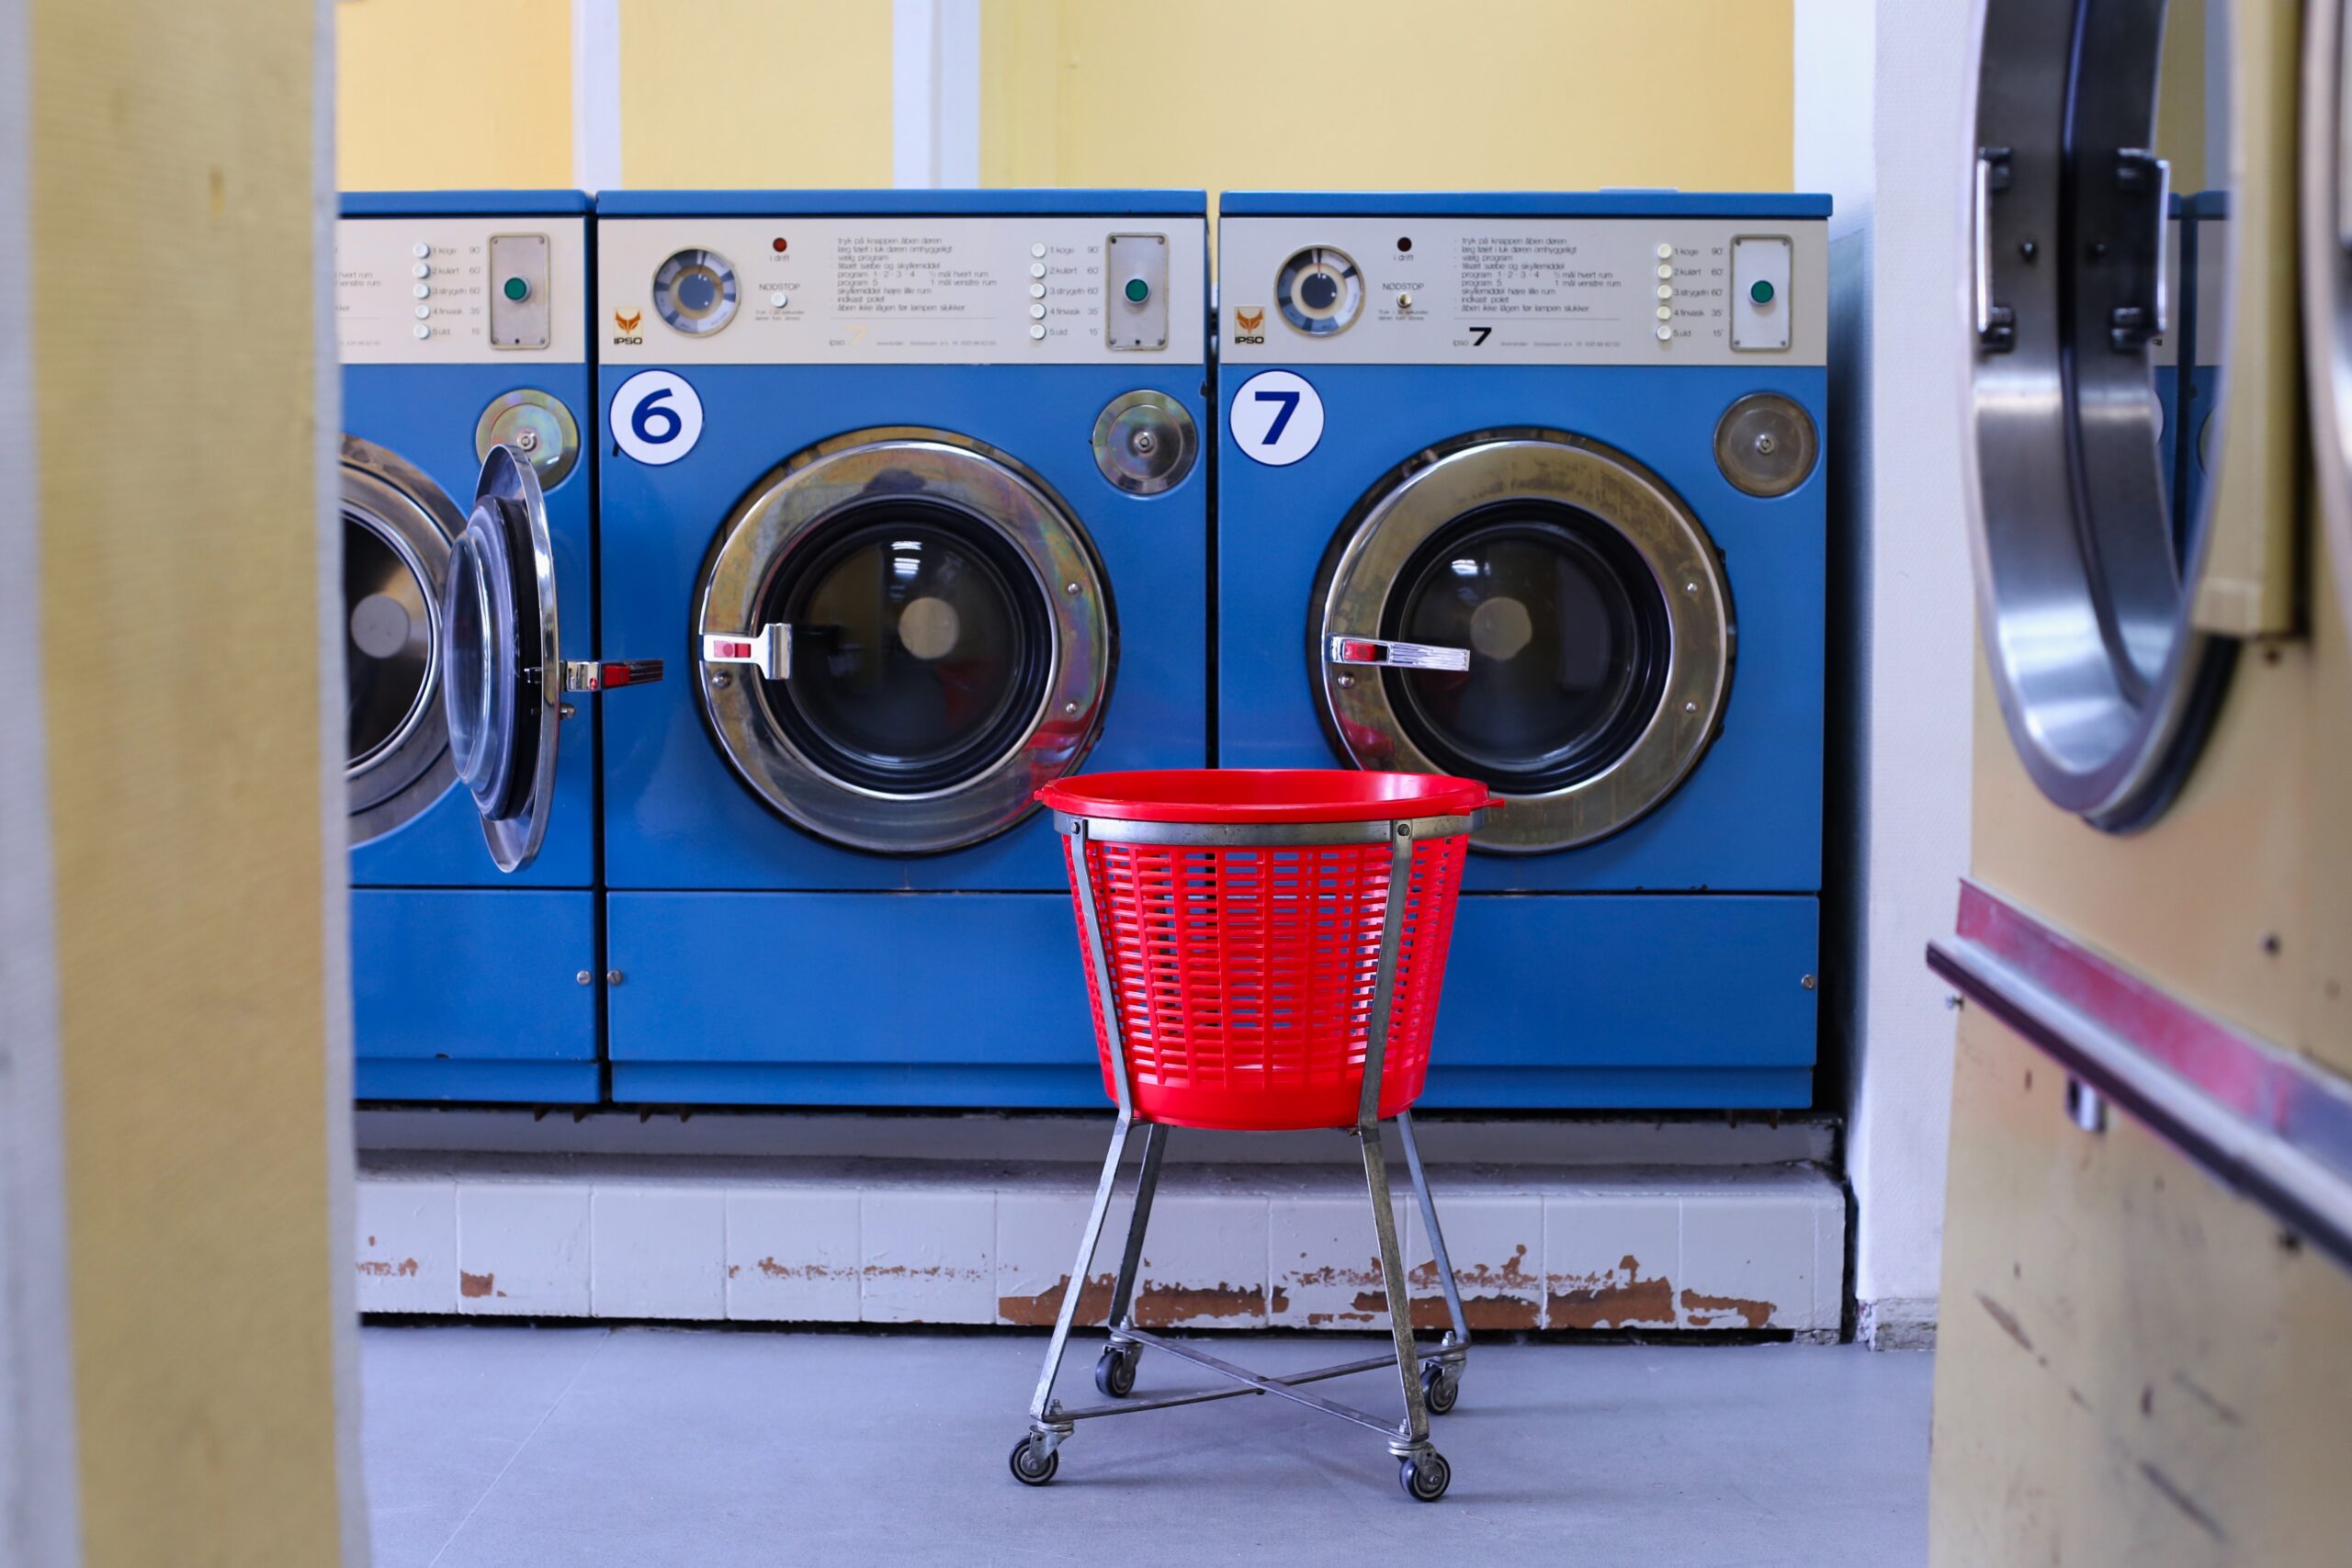 Laundry Services for Urban Professionals: One Less Task to Worry About